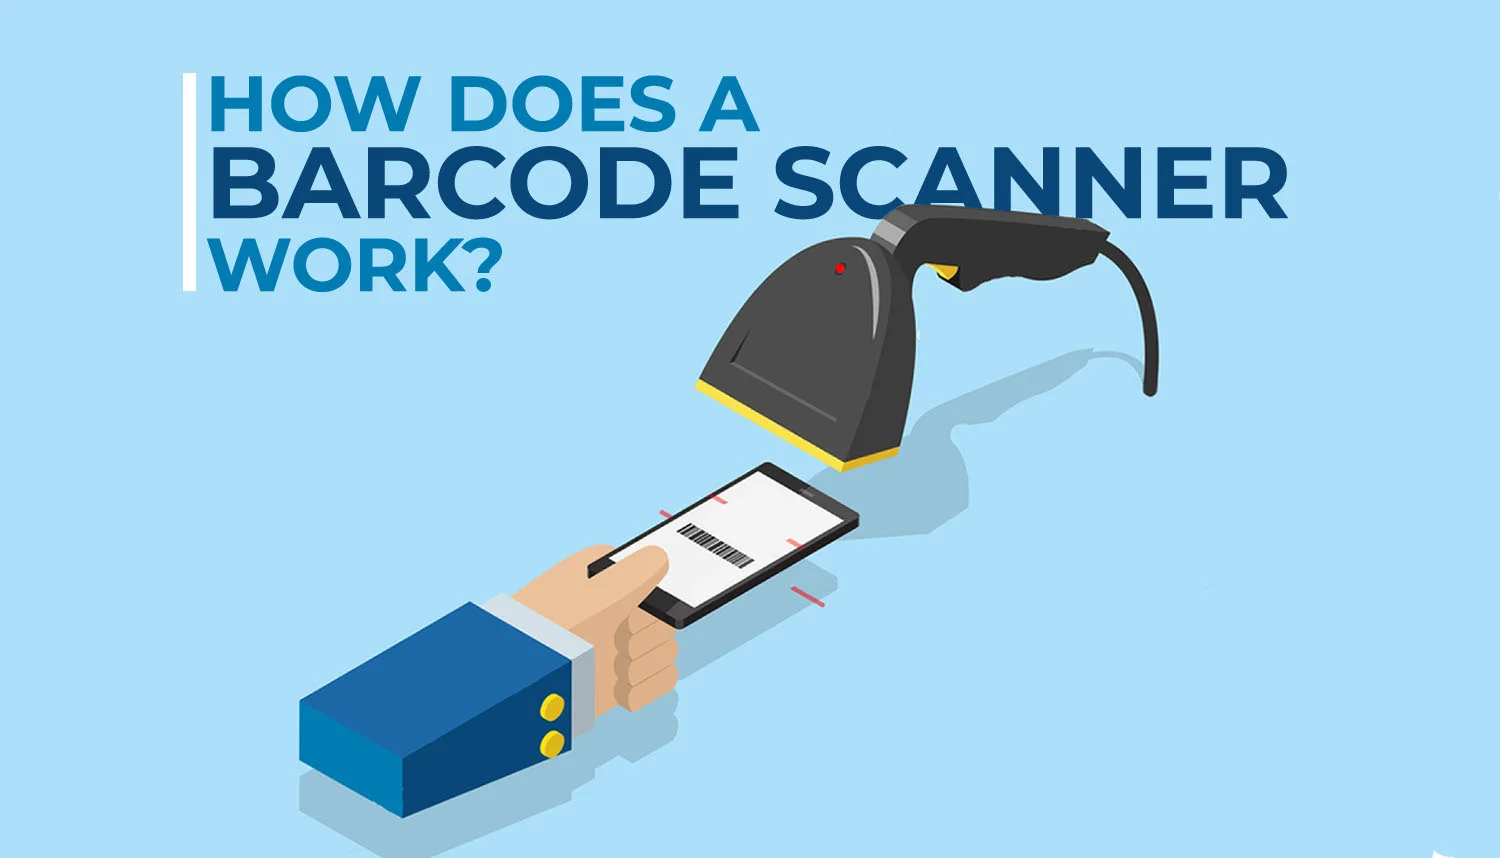 How does a barcode scanner work